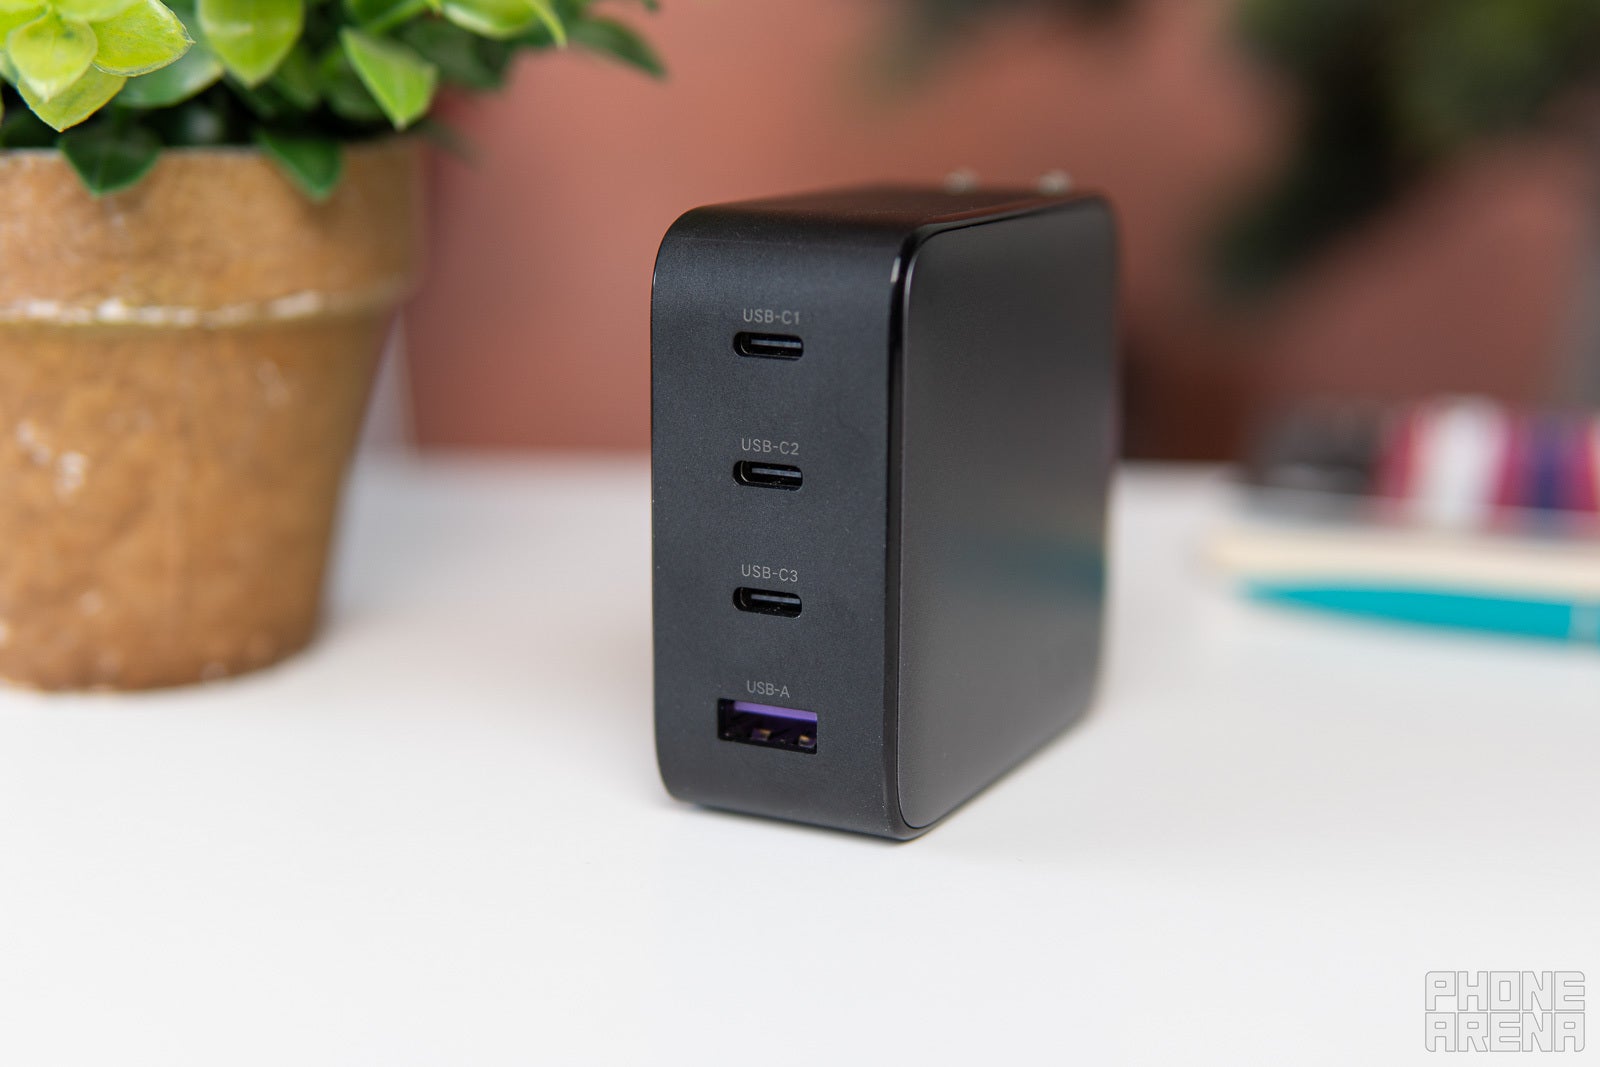 The end of your charging troubles: Ugreen GaN 100 W fast charging hub!